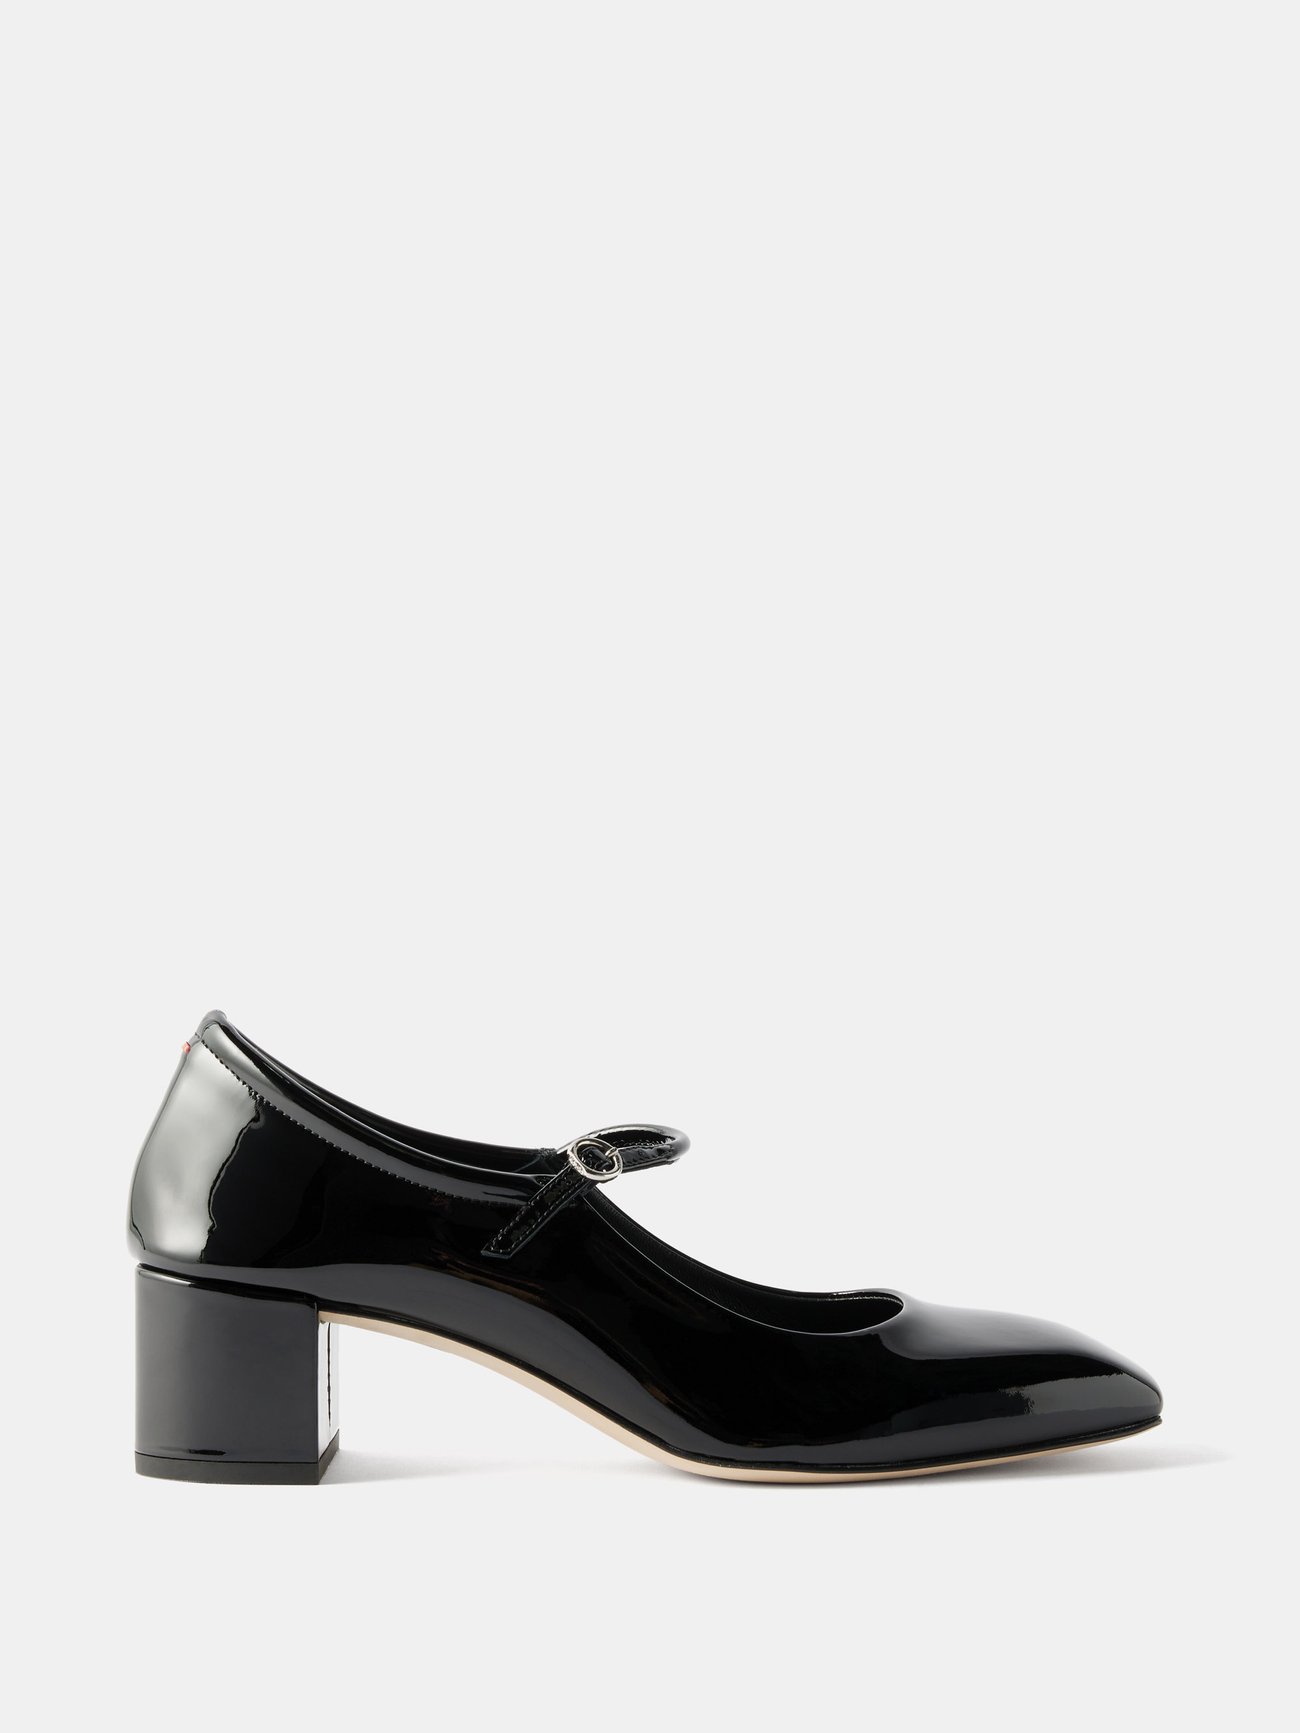 Anne Hathaway's Patent-Leather Shoes Are the Next Big Trend | Who What ...